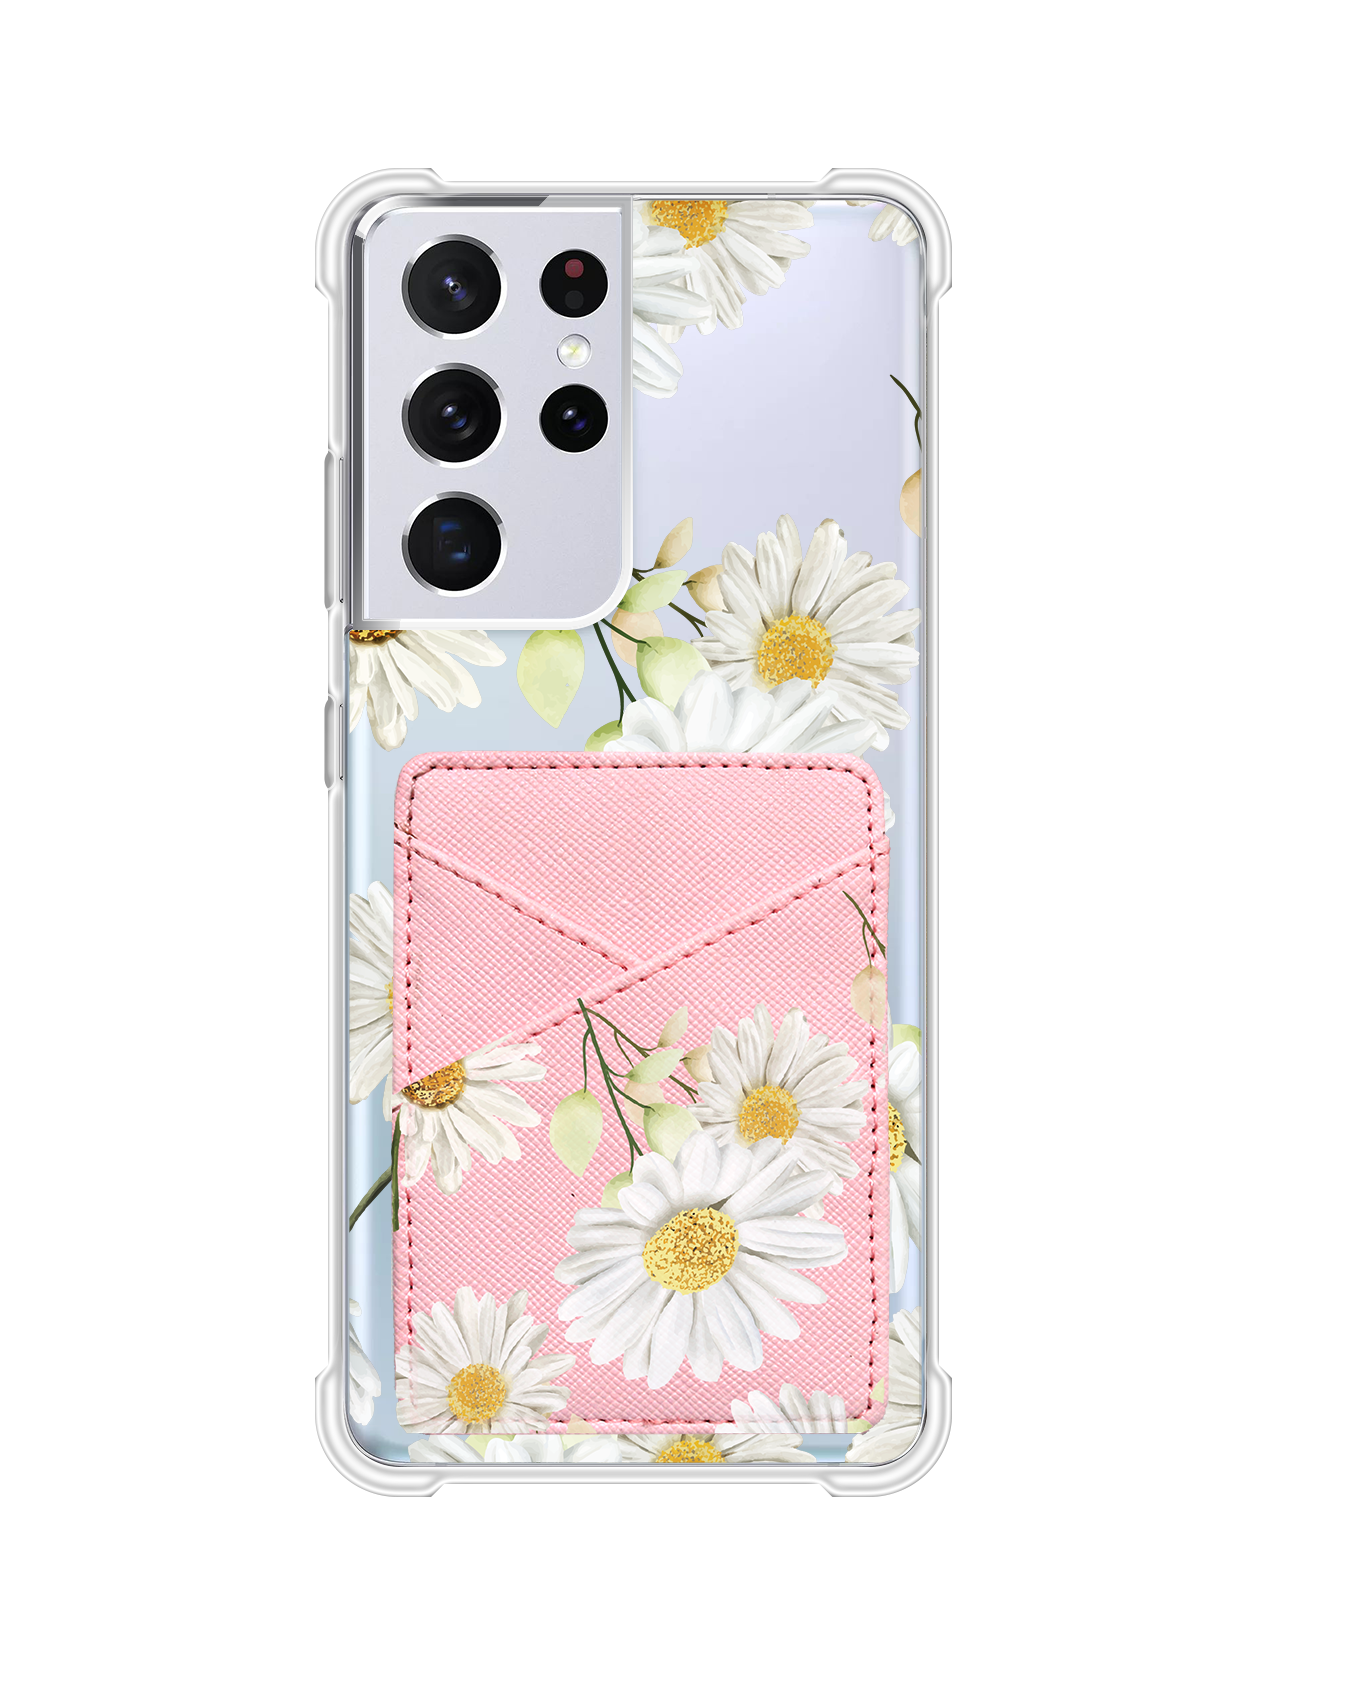 Android Phone Wallet Case - October Chrysanthemum 2.0